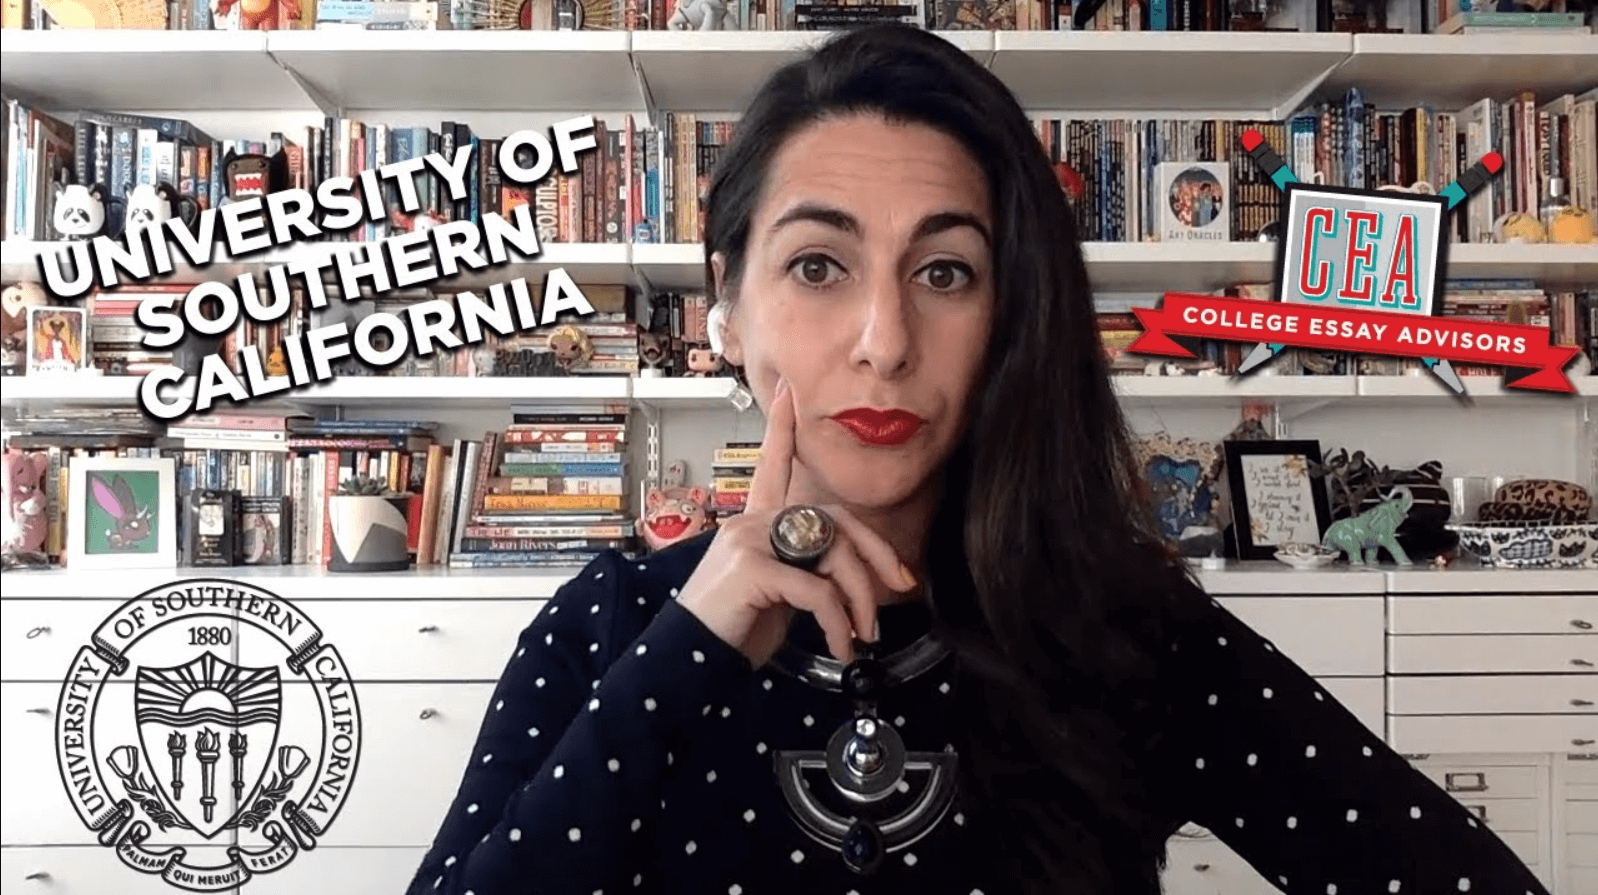 Guide to the 2020-21 University of Southern California (USC) Essays | CEA